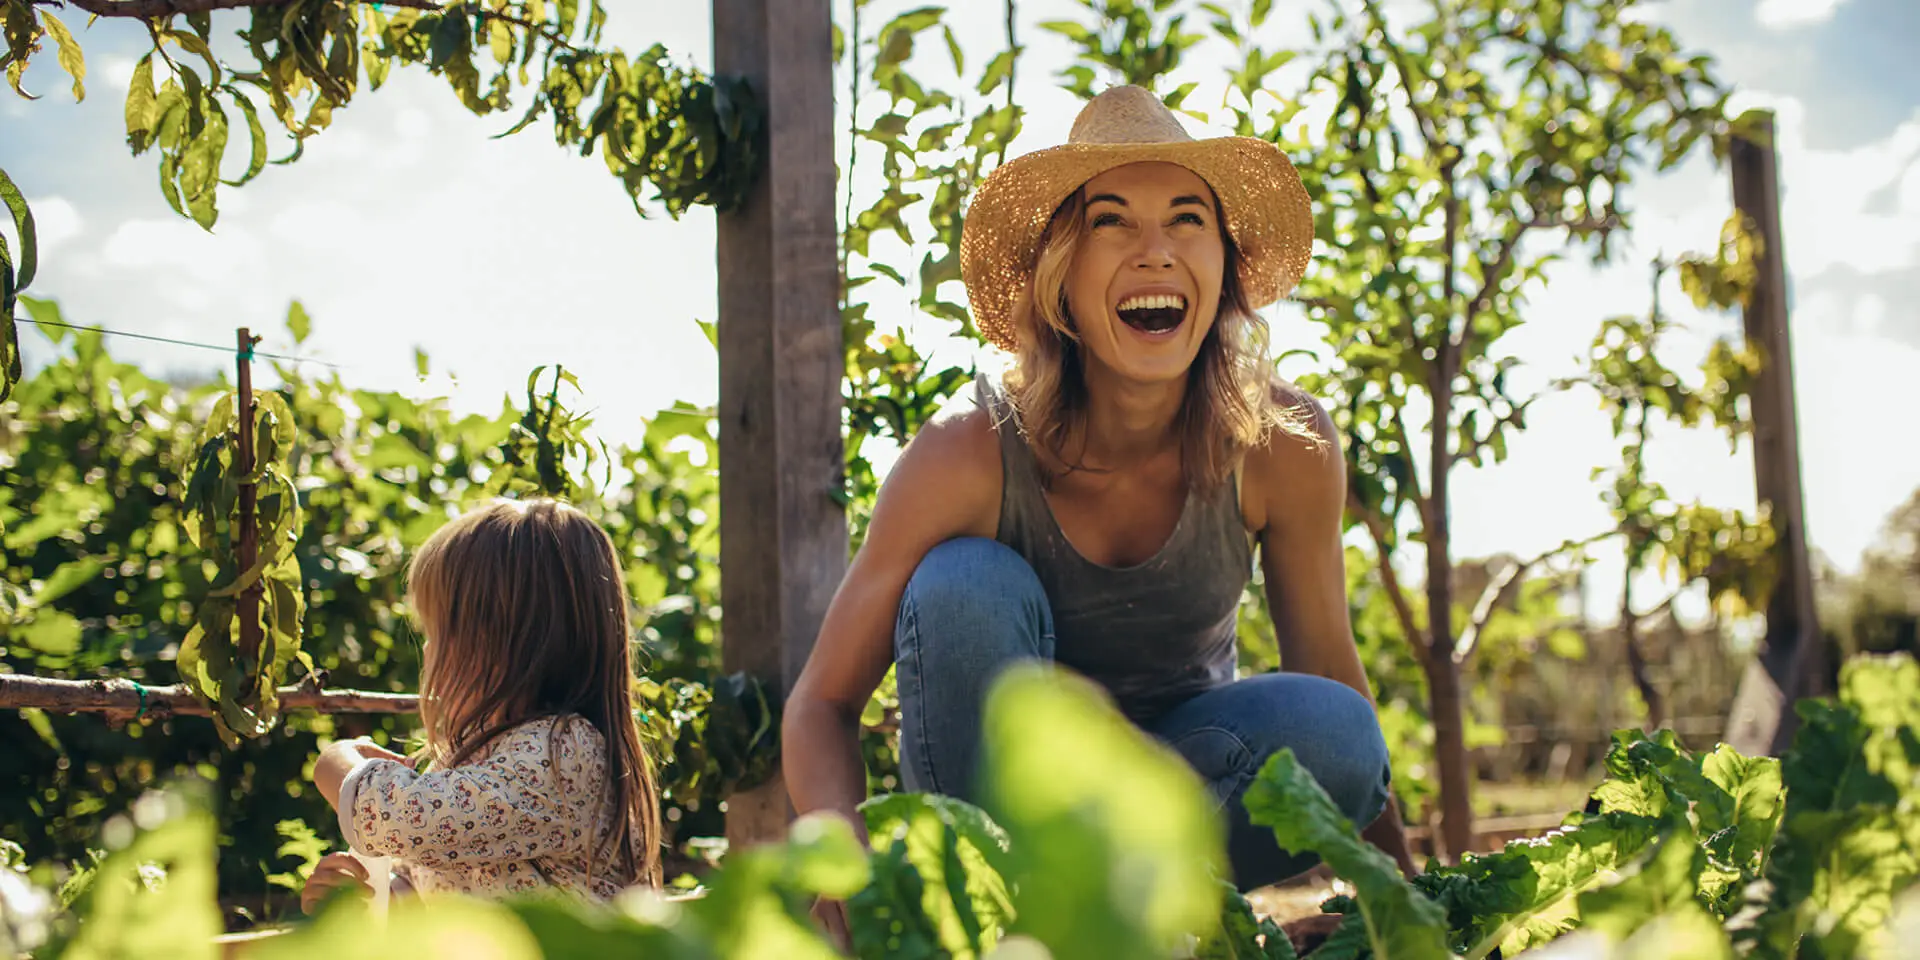 Mother and daughter sit laughing together in the vegetable garden